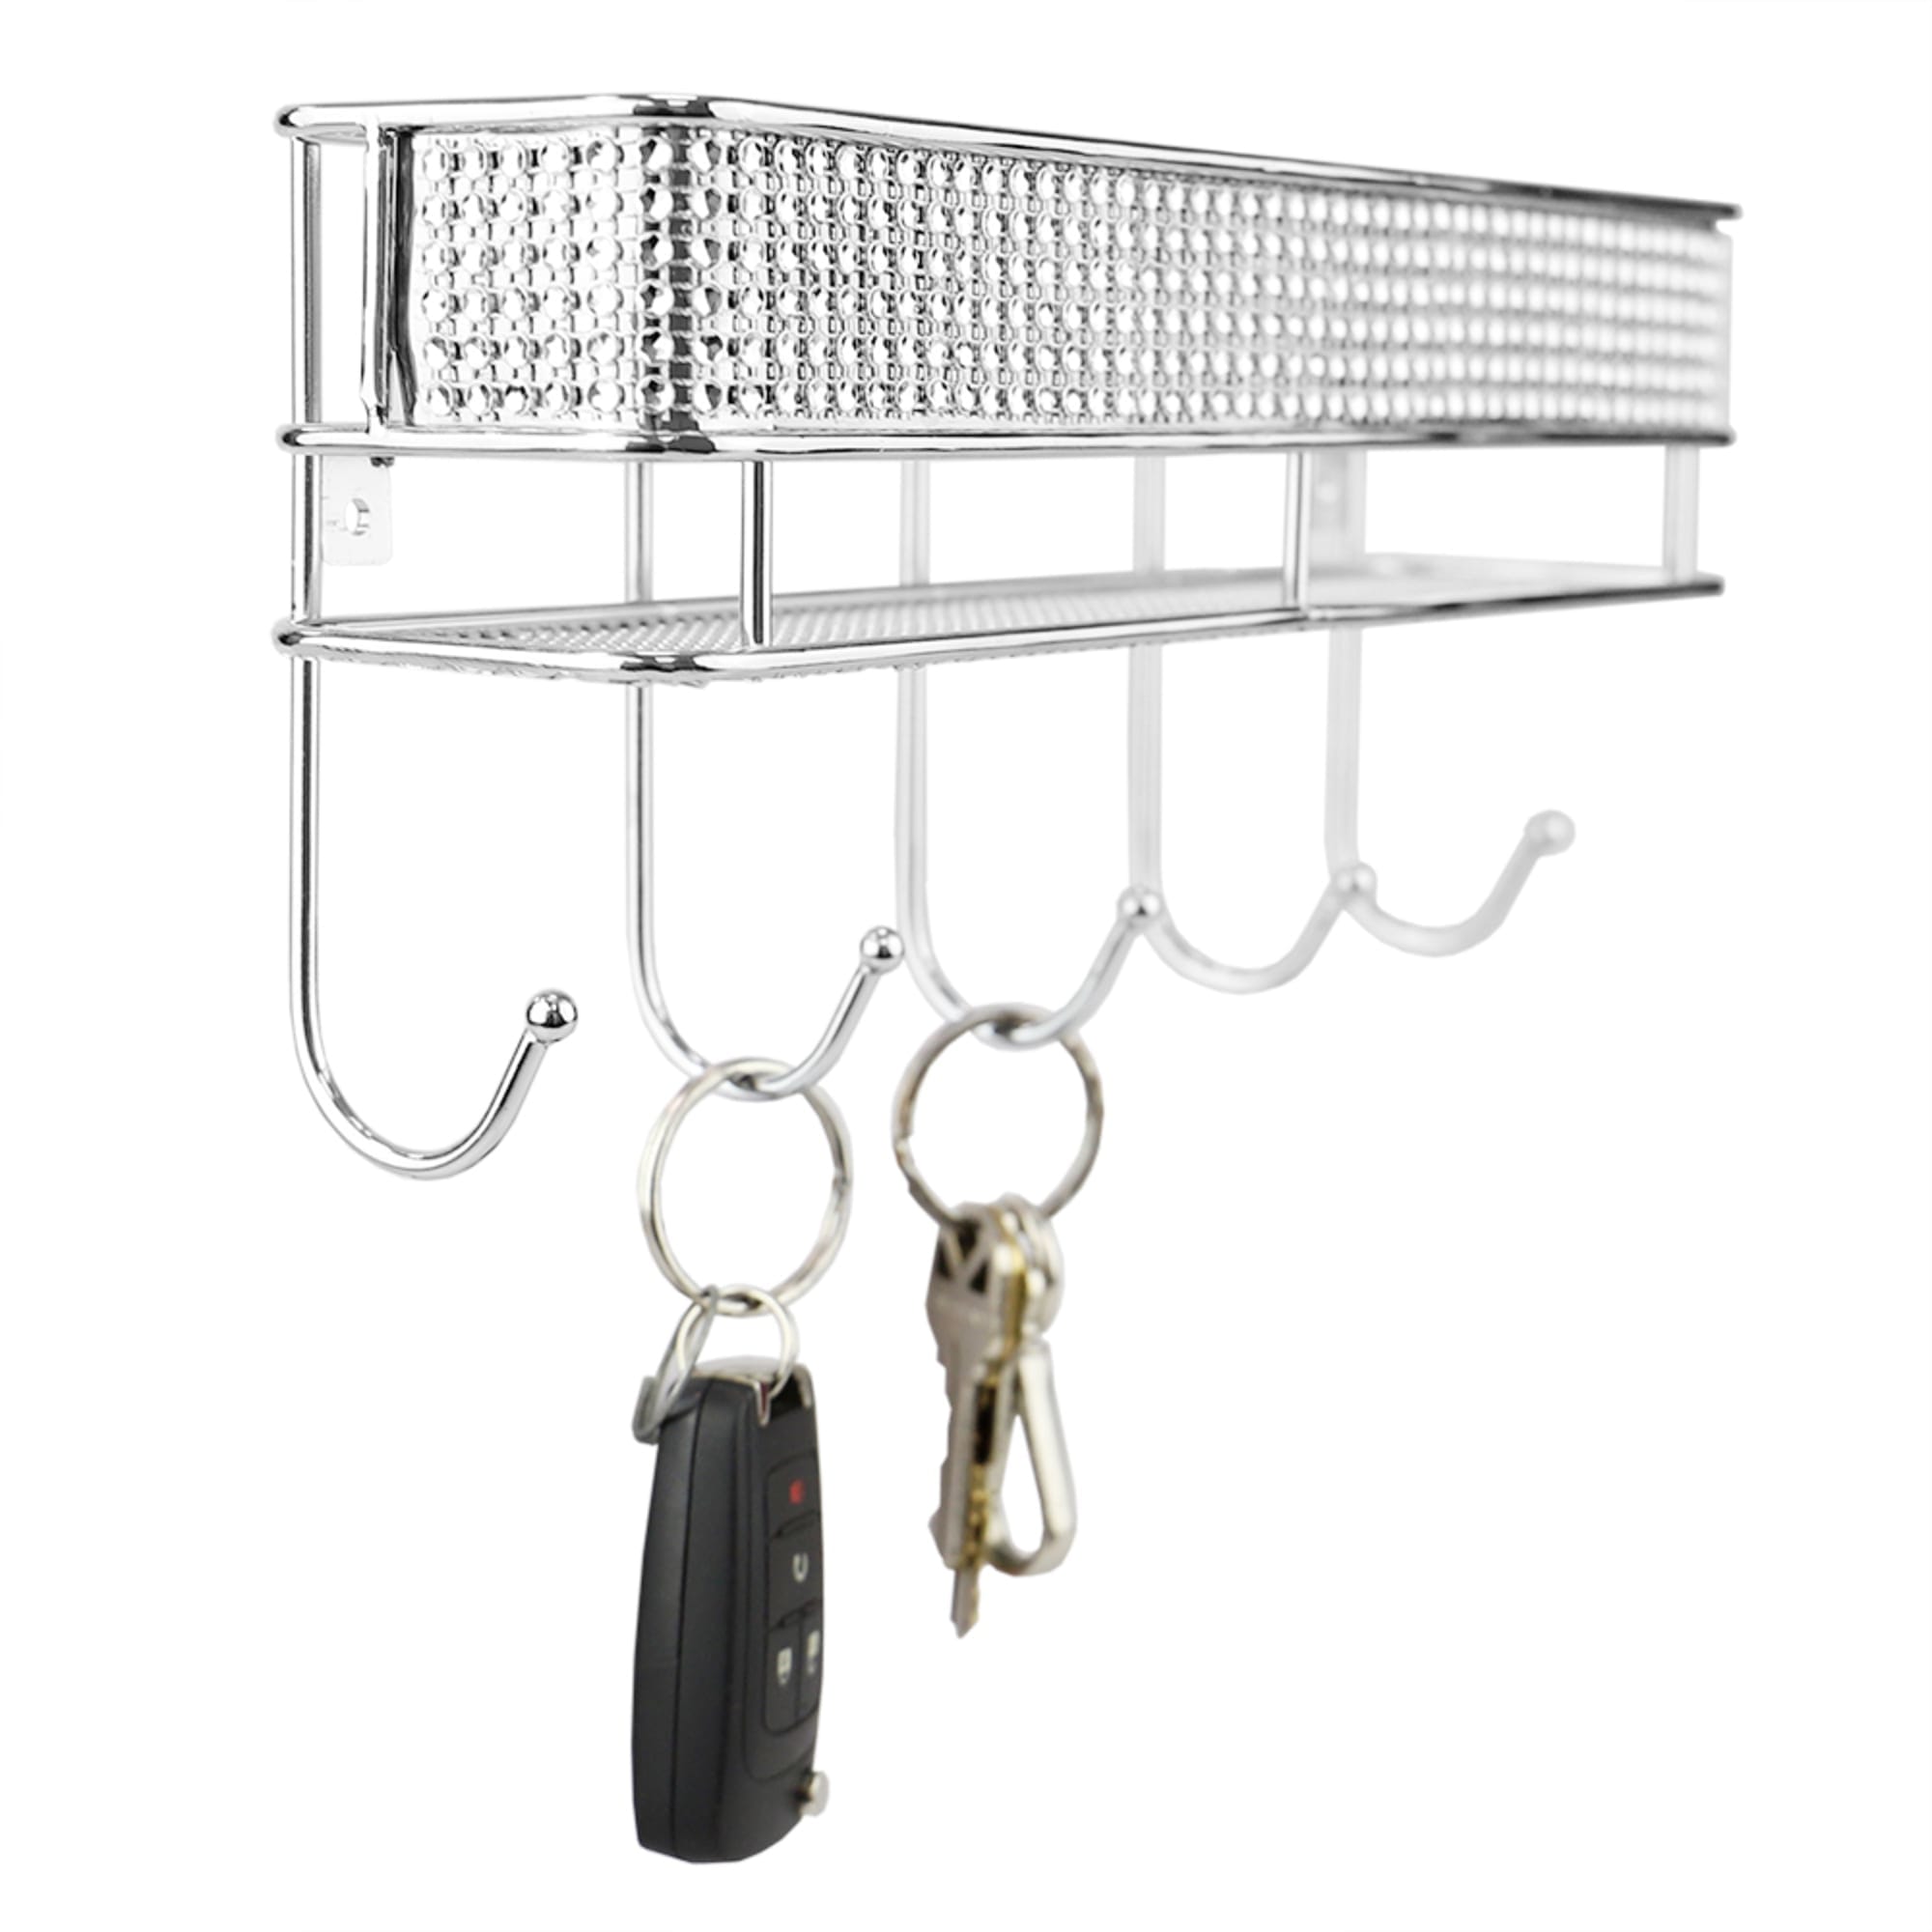 Home Basics Pave Steel Wall Mount Letter Rack Organizer with Key Hooks, Chrome $5.00 EACH, CASE PACK OF 12